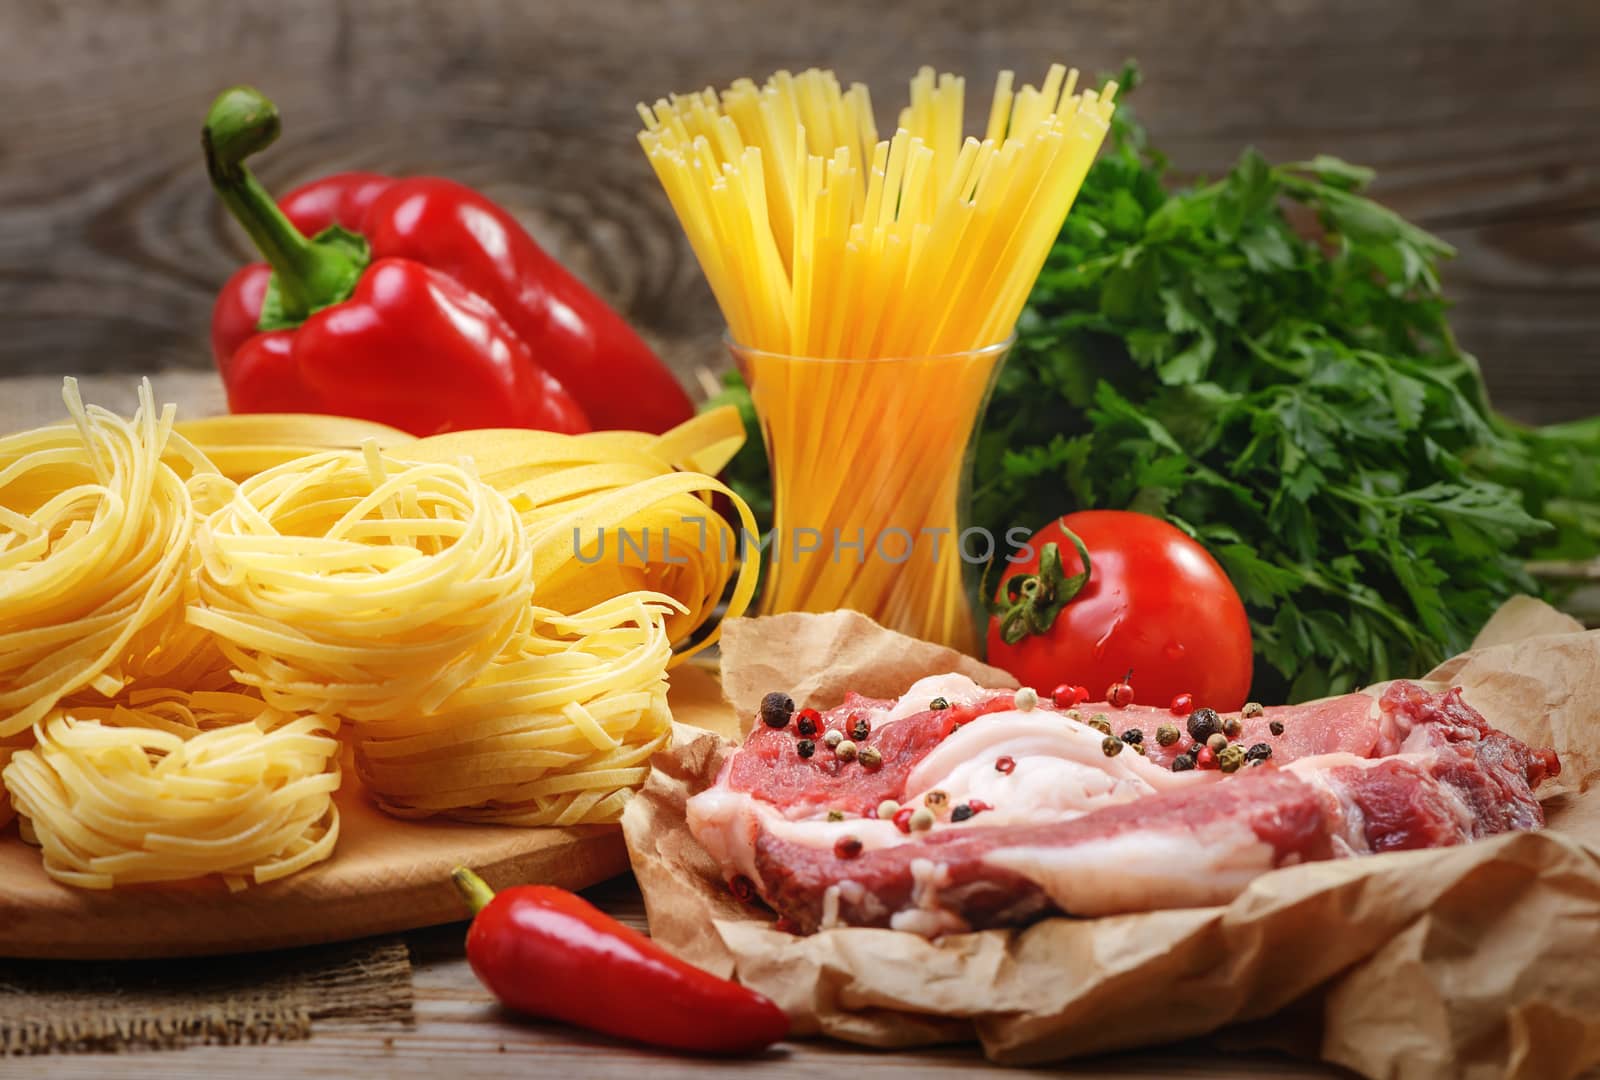 Ingredients for cooking pasta, Italian food, meat and spices, tomato, bell pepper